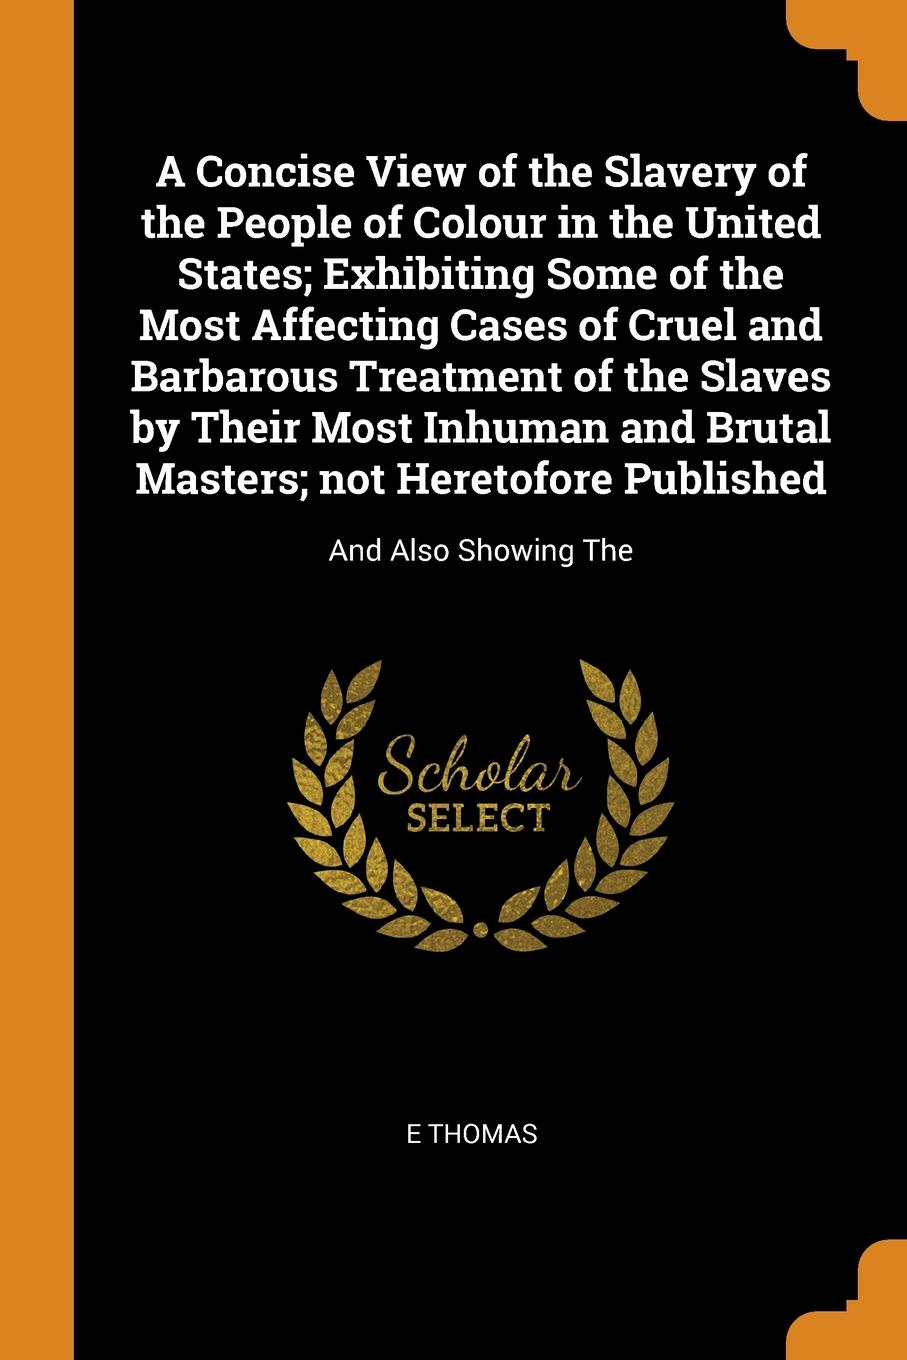 A Concise View of the Slavery of the People of Colour in the United States; Exhibiting Some of the Most Affecting Cases of Cruel and Barbarous Treatment of the Slaves by Their Most Inhuman and Brutal Masters; not Heretofore Published. And Also Sho...